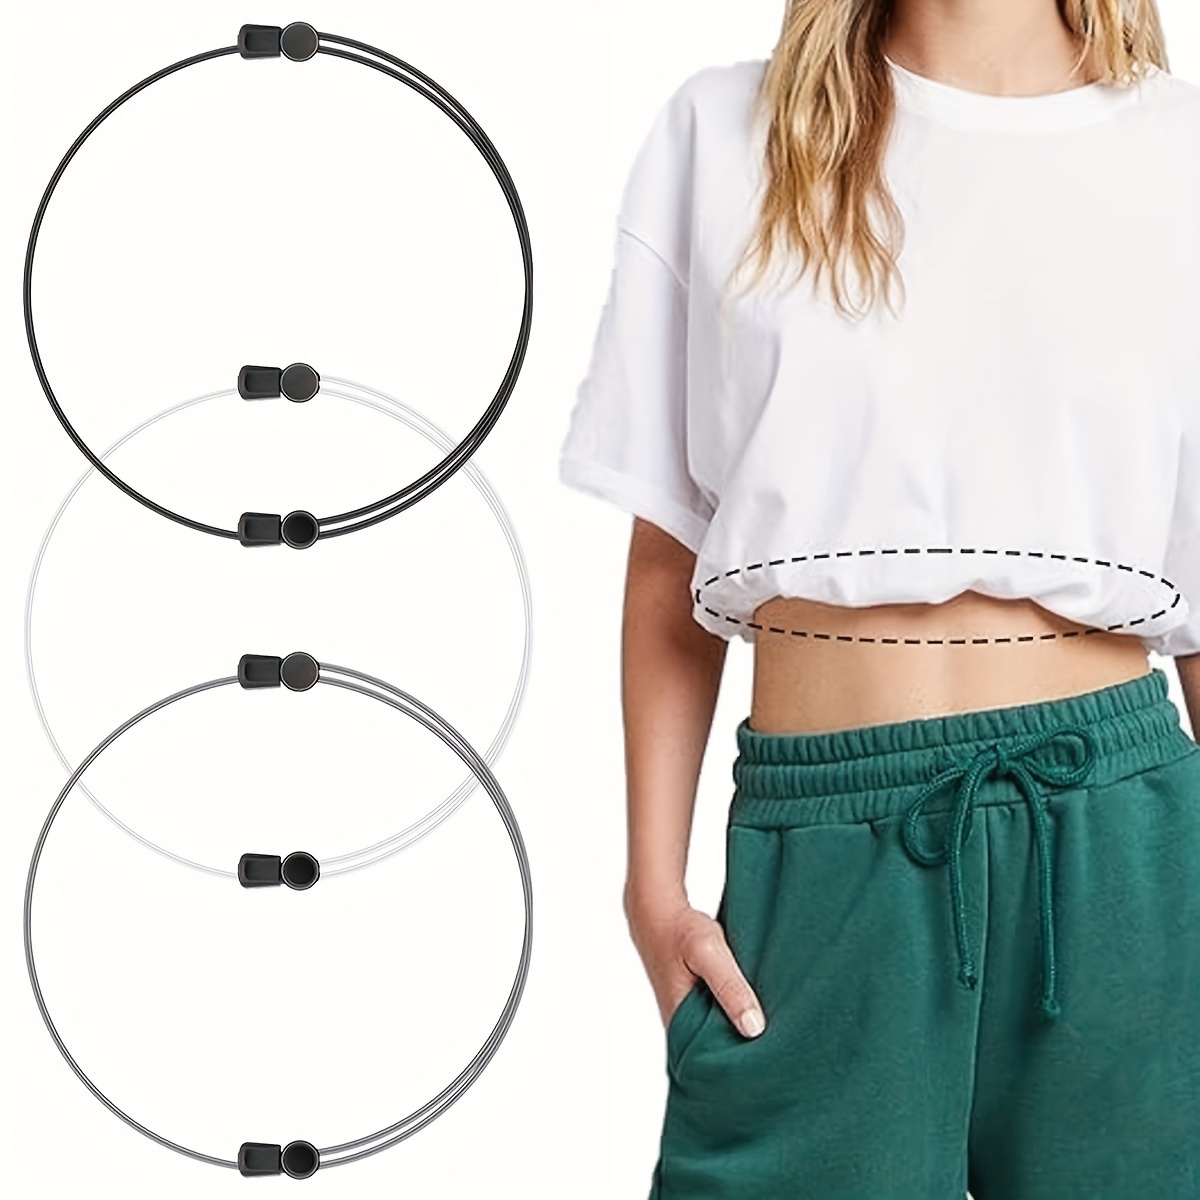 1pc Crop Tuck Adjustable Band, Crop Tuck Tool For Shirt, The Band Transform  The Way You Style Your Tops